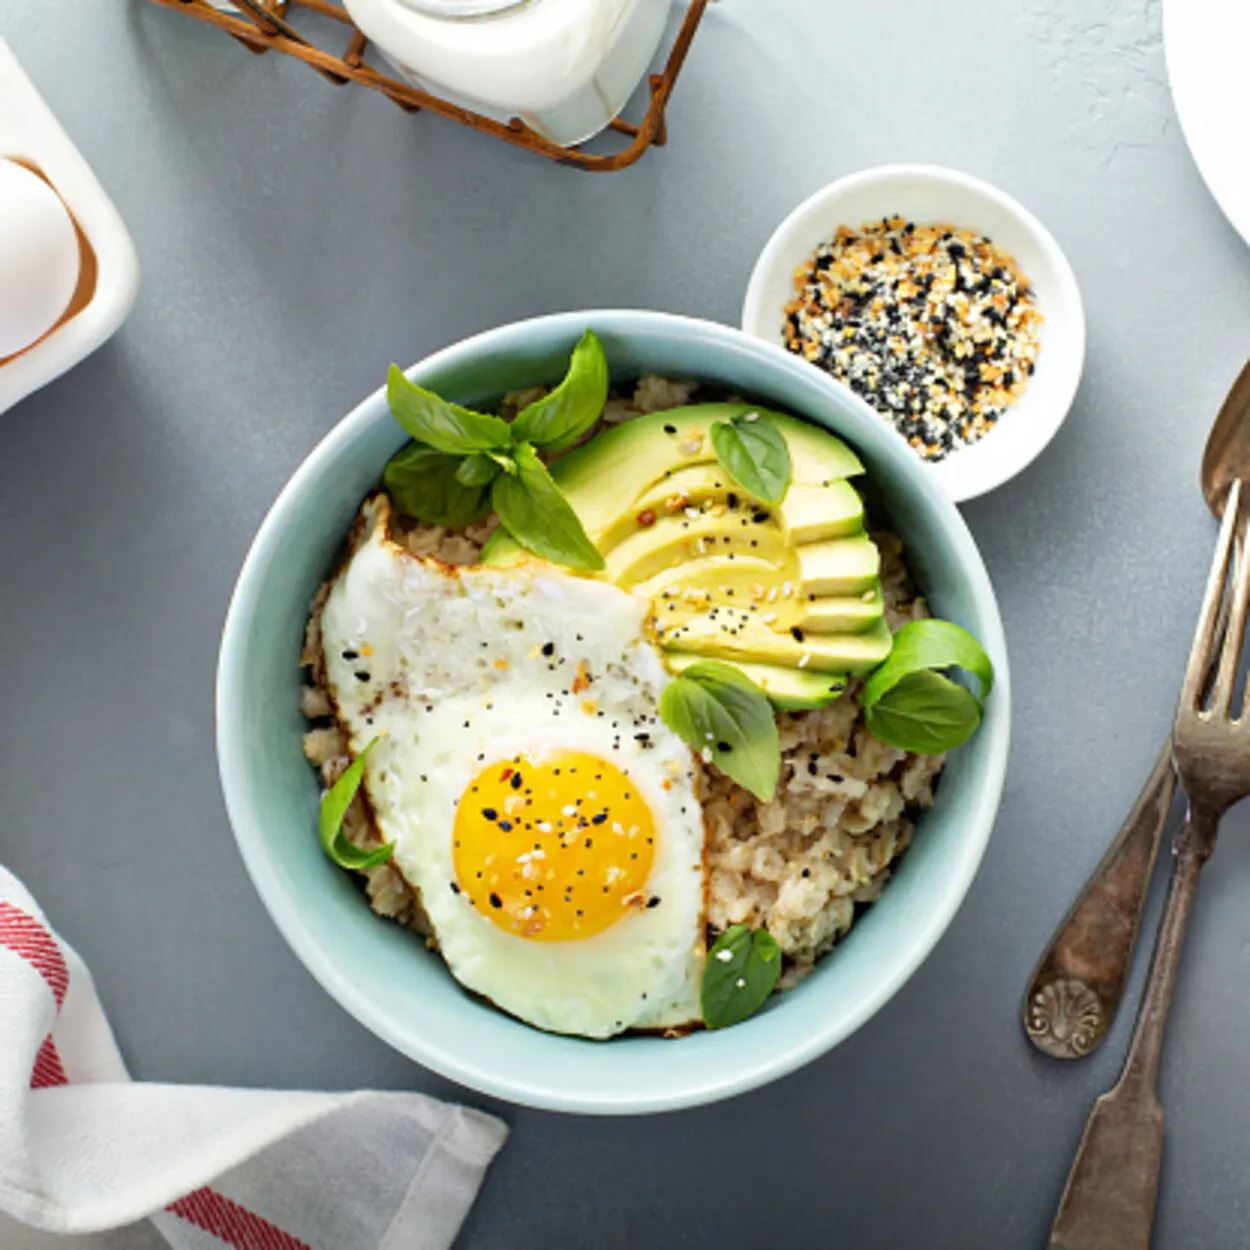 Oatmeal bowl with a half-fried egg and avocado on top